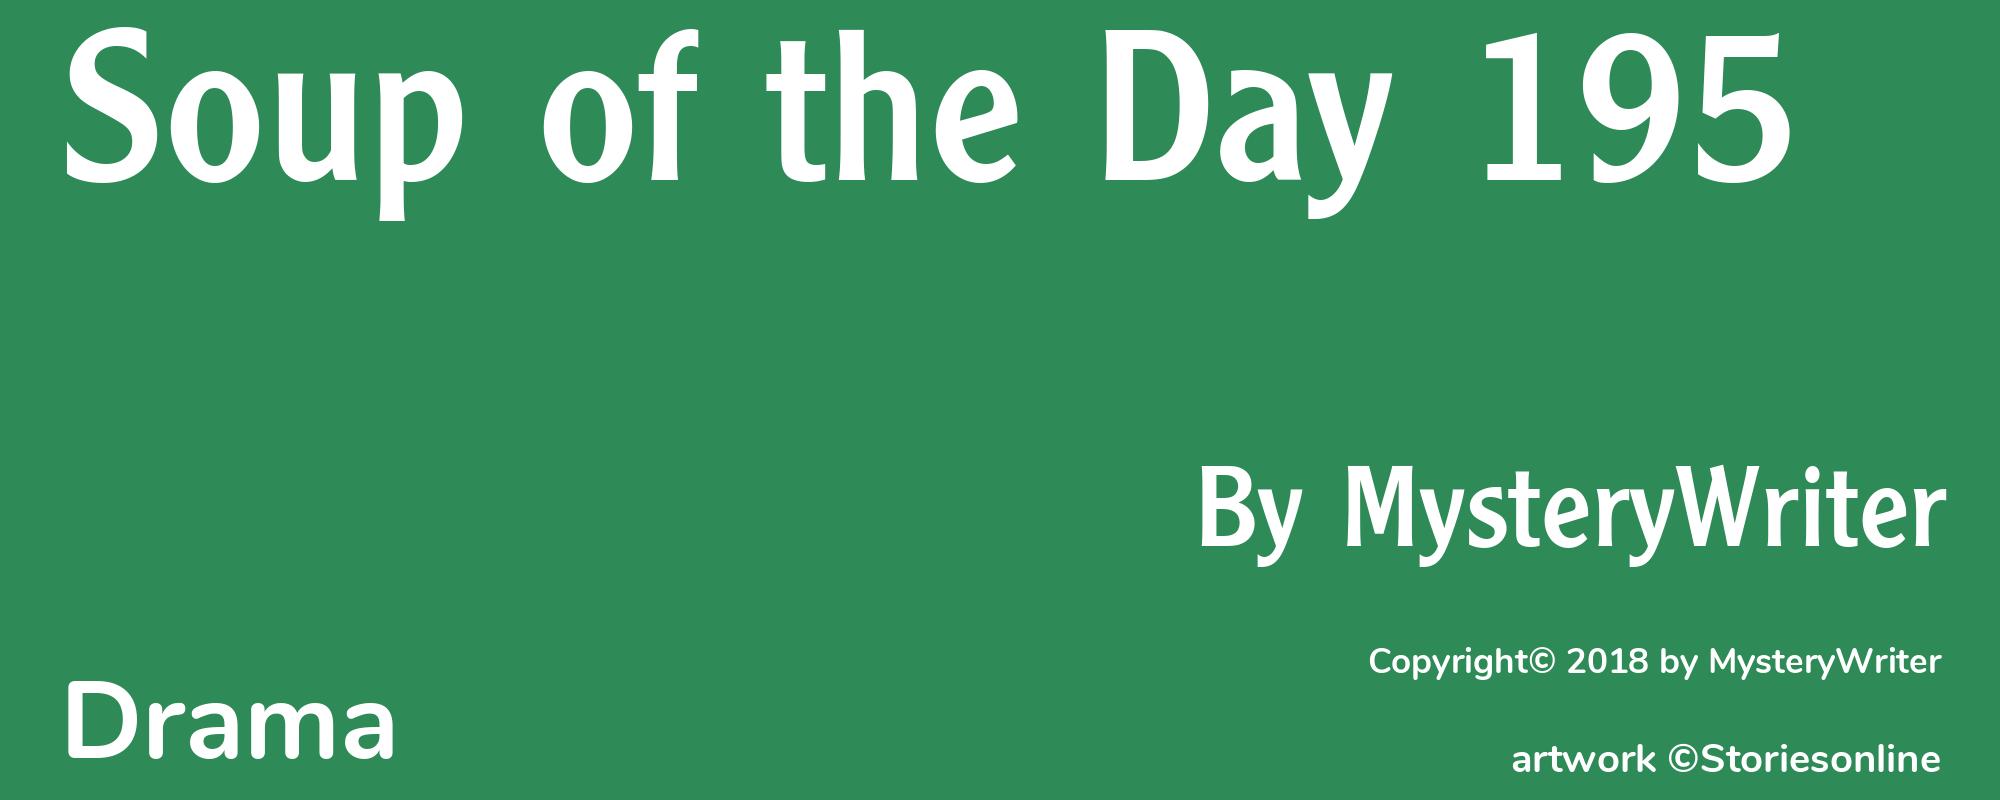 Soup of the Day 195 - Cover